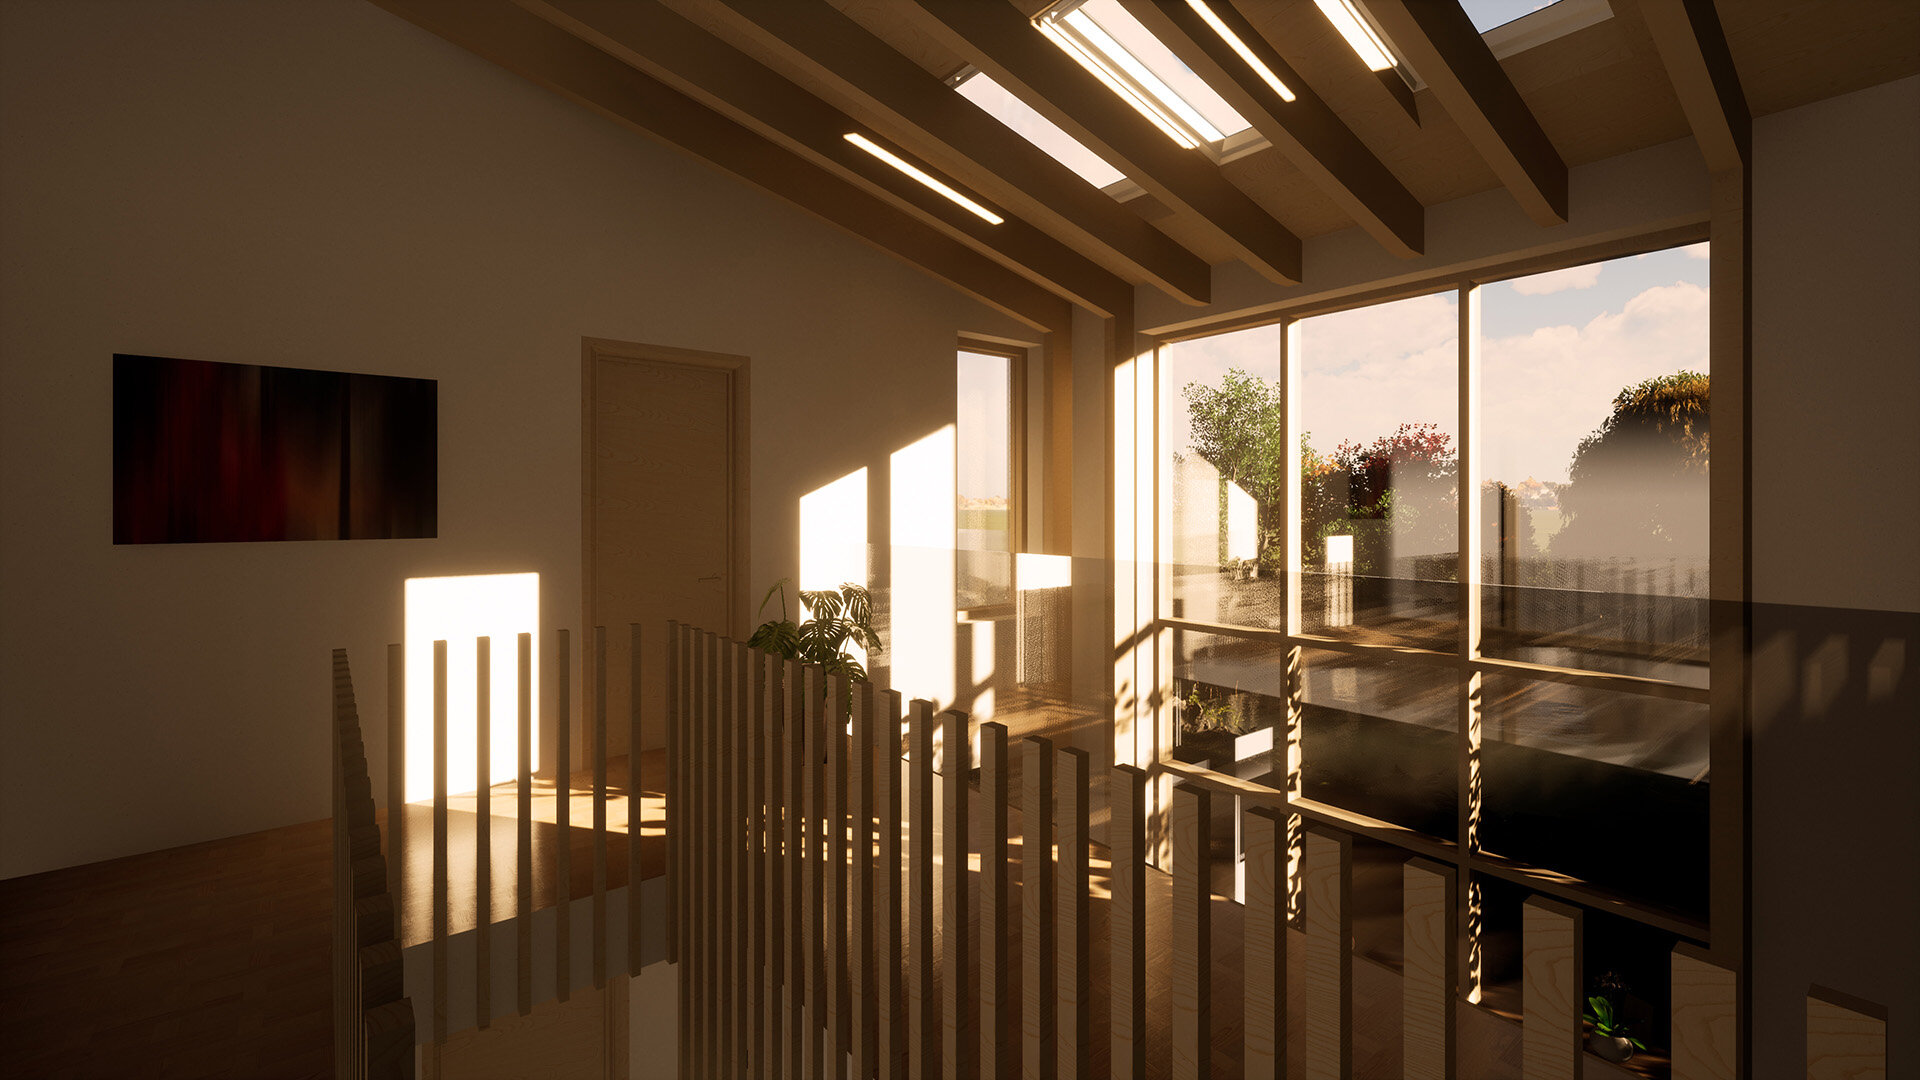 SOUTH CAVE PASSIVHAUS_INTERIOR 05_SUSTAINABLE YORKSHIRE ARCHITECTS_SAMUEL KENDALL ASSOCIATES